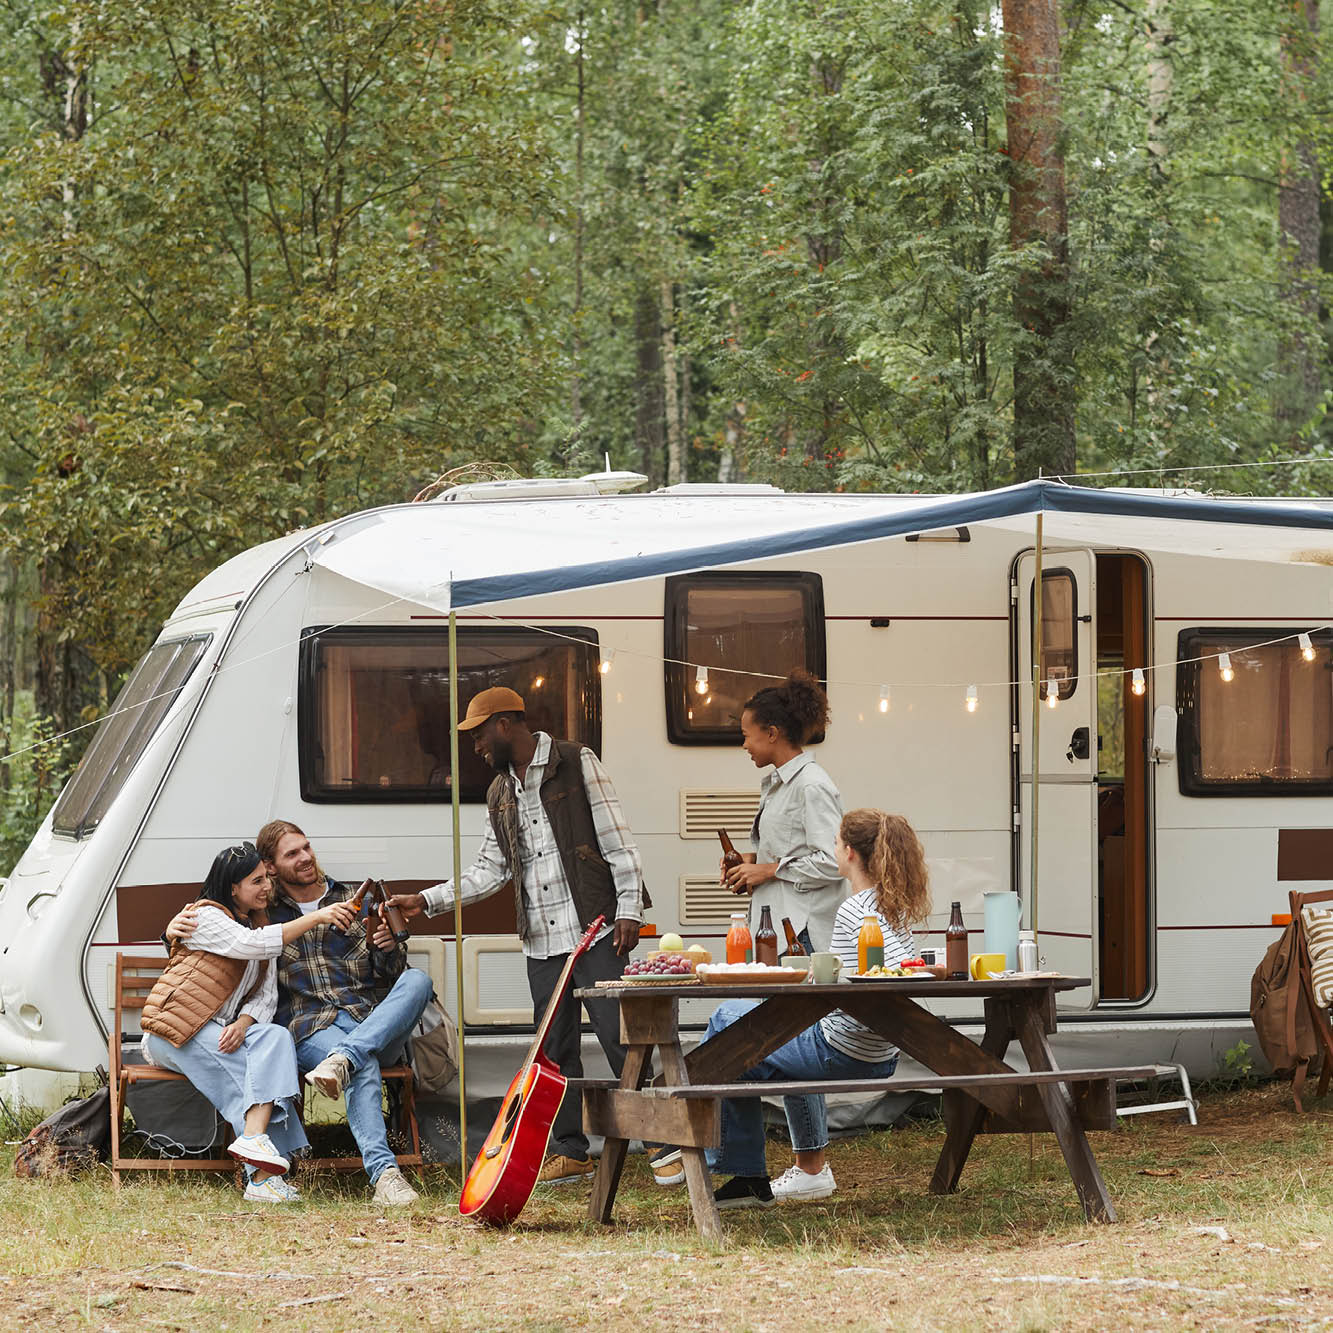 group of people camping in an RV